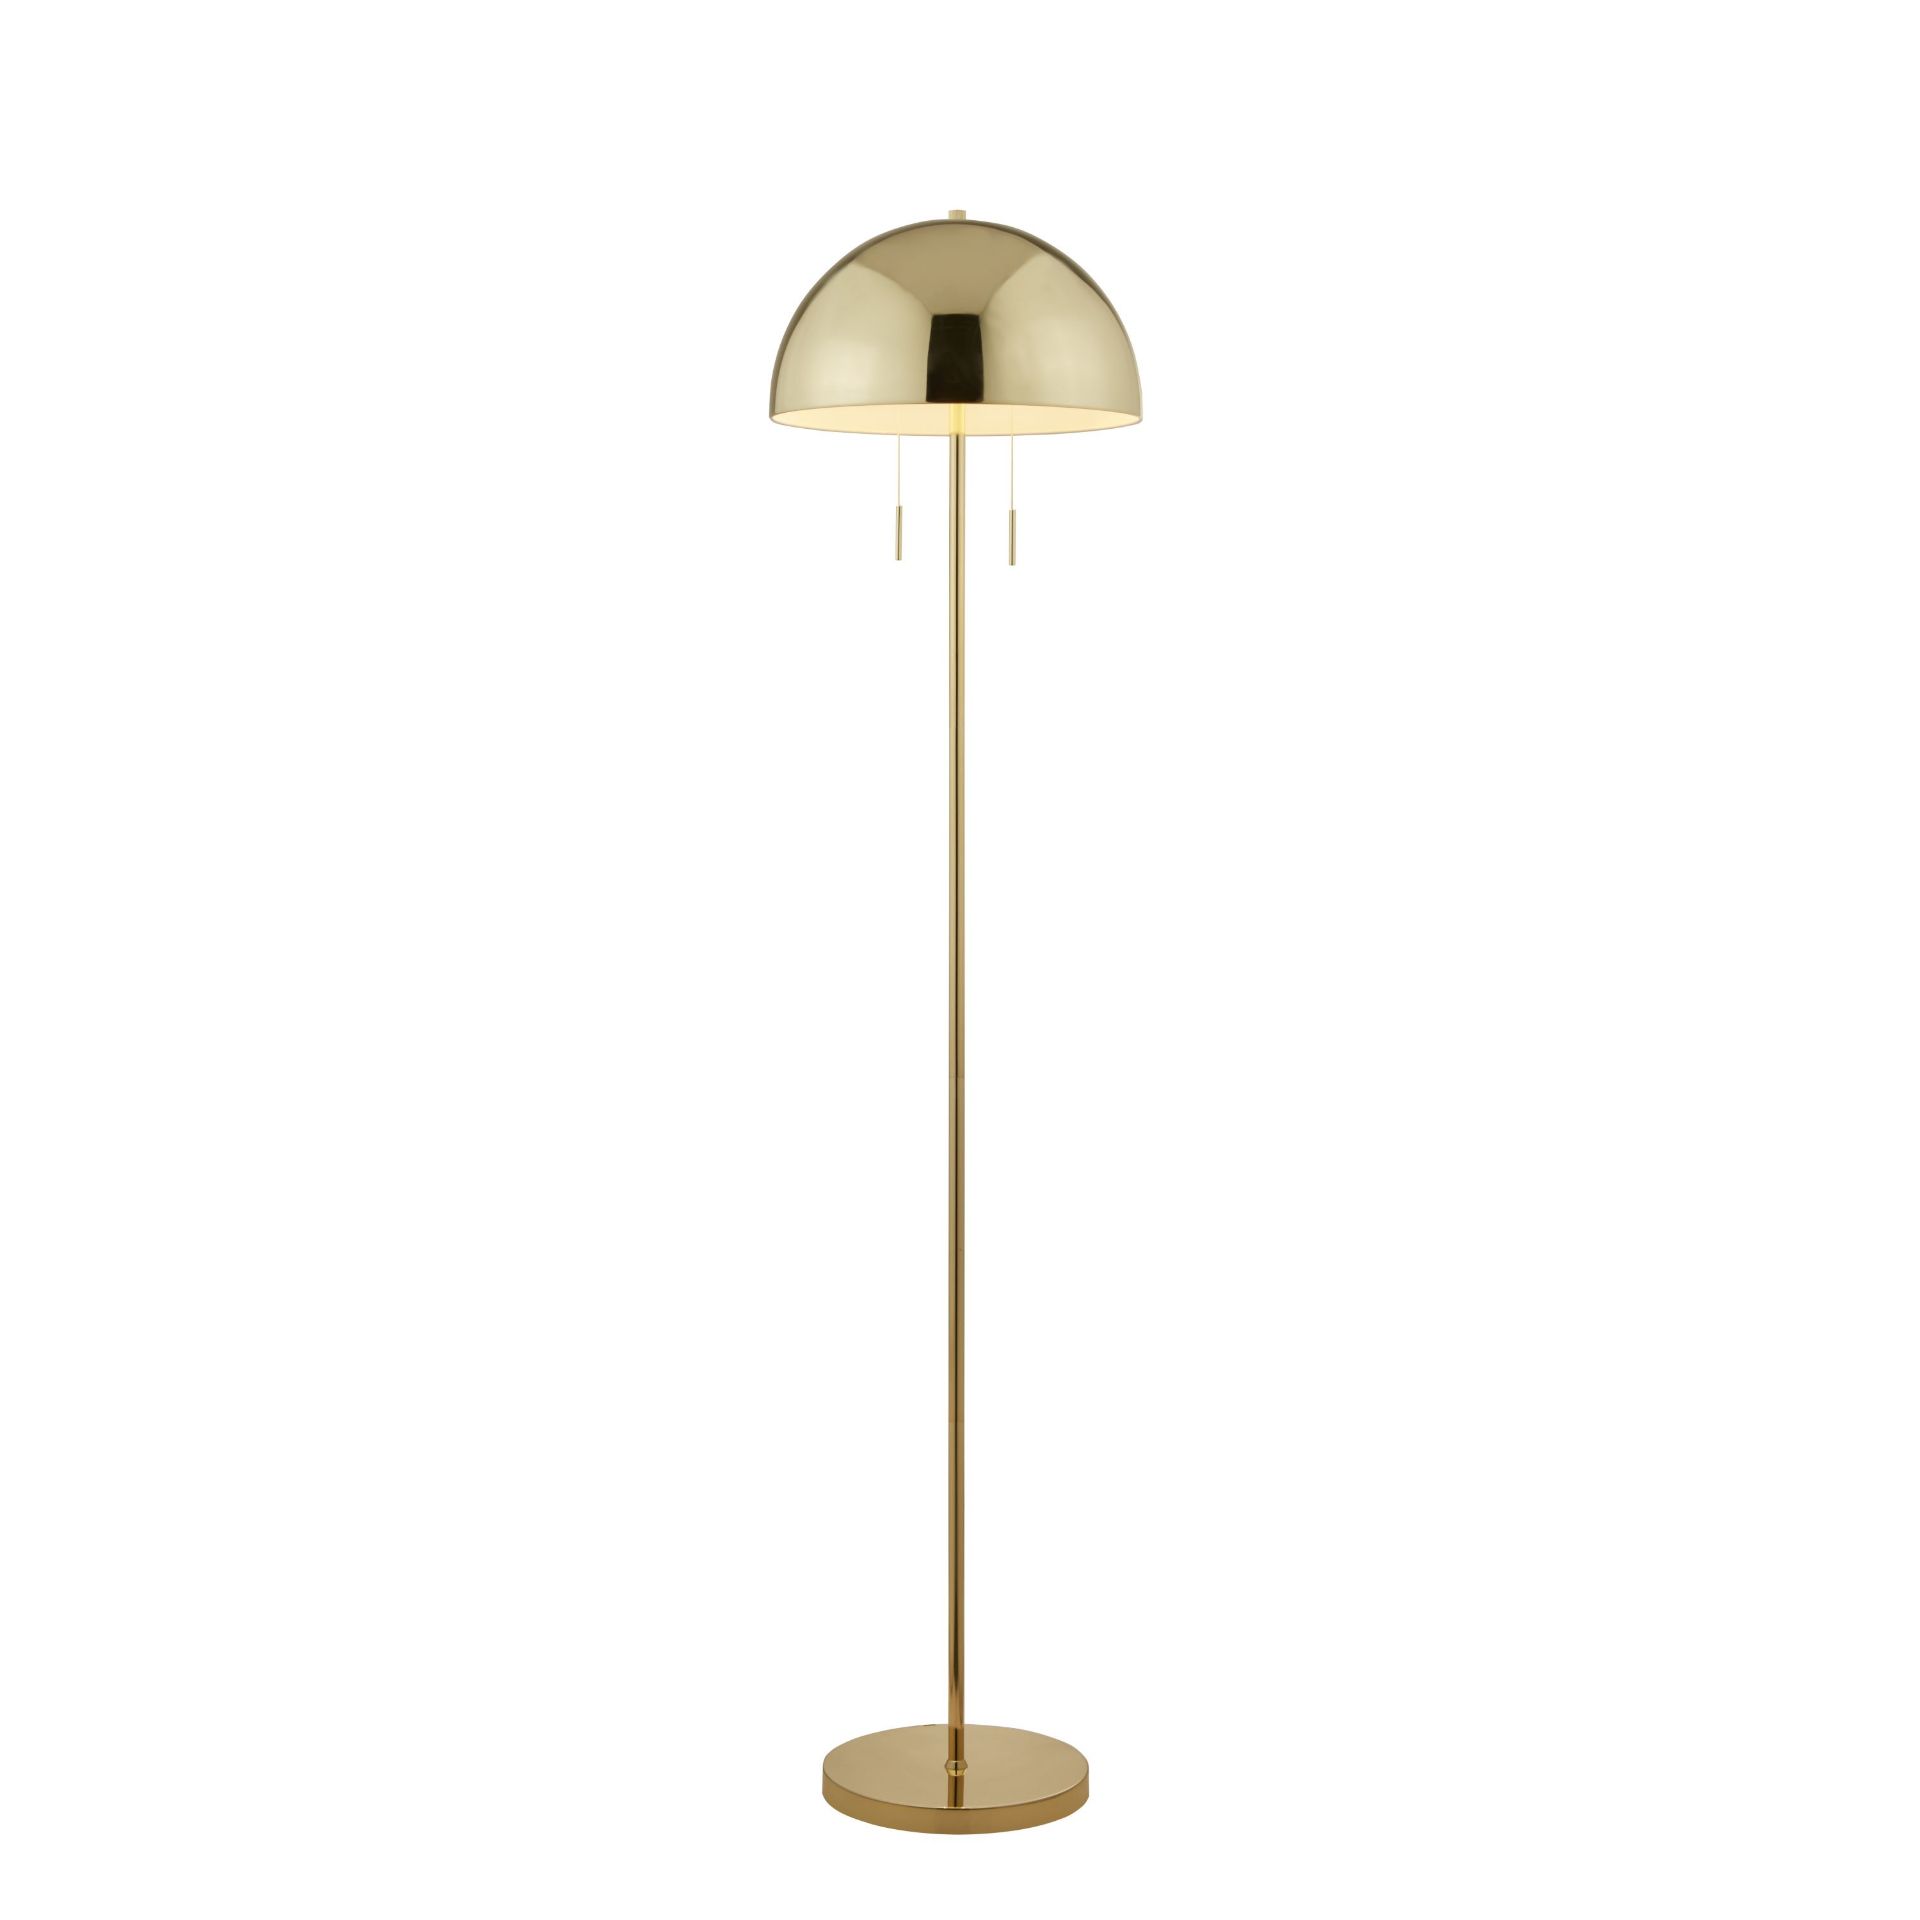 BRAND NEW BRASS FLOOR LAMP, 150CM HIGH, 60W. Tall polished brass floor lamp with dome shade.